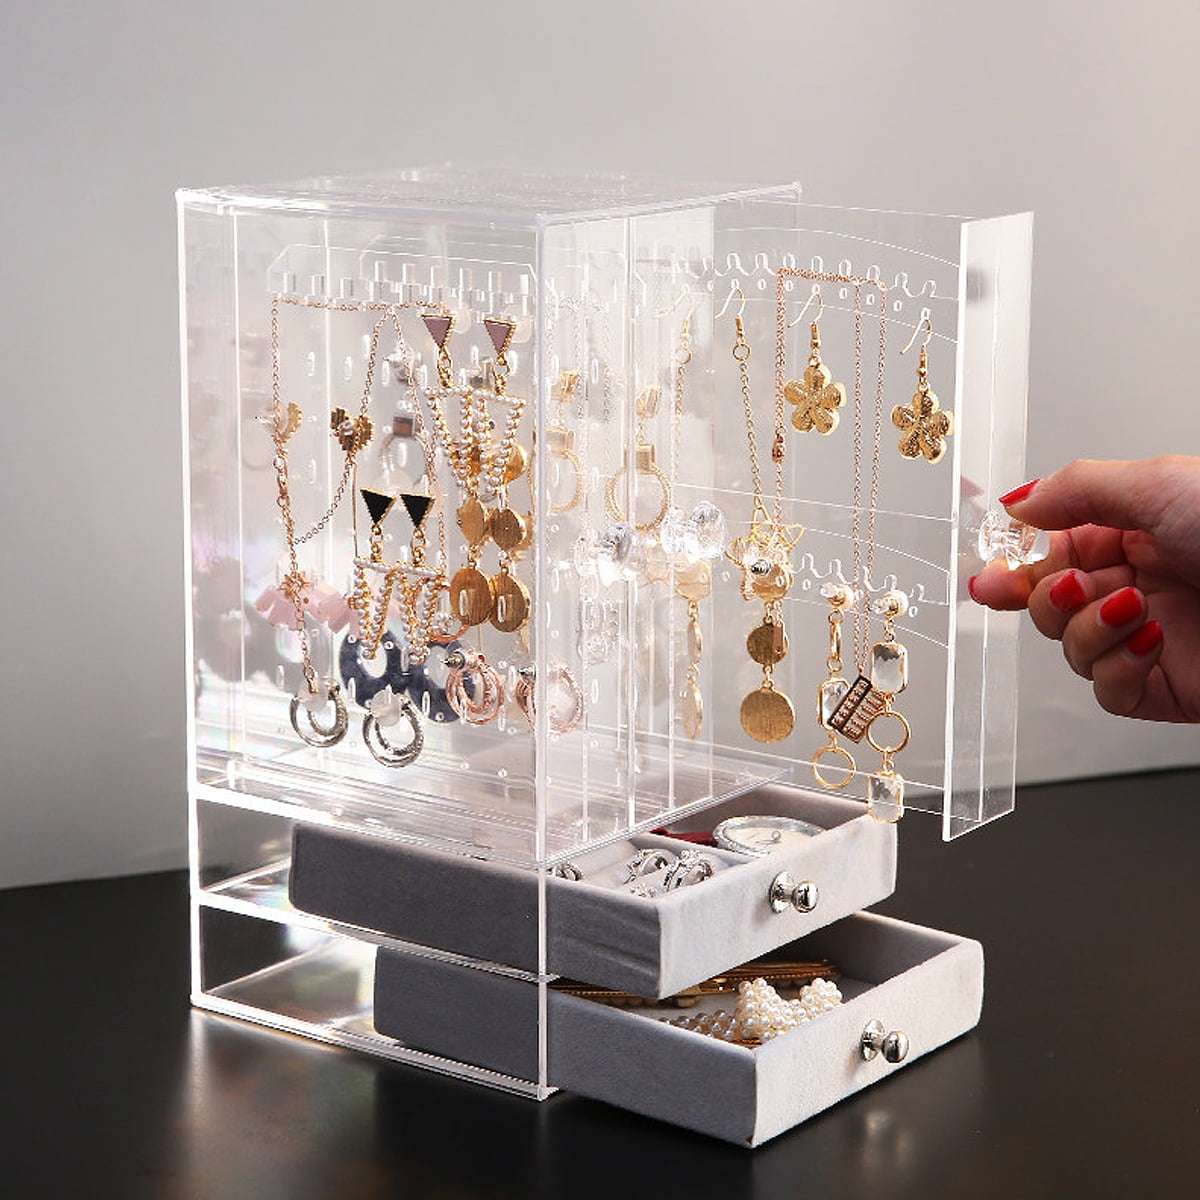 Cq acrylic Jewelry Box and Earring Holder Jewelry Hanging Organizer,Pull-Type dustproof Acrylic Earring Screen Display Stand Hanging Earrings Bracelets Necklaces Beige Pack of 1